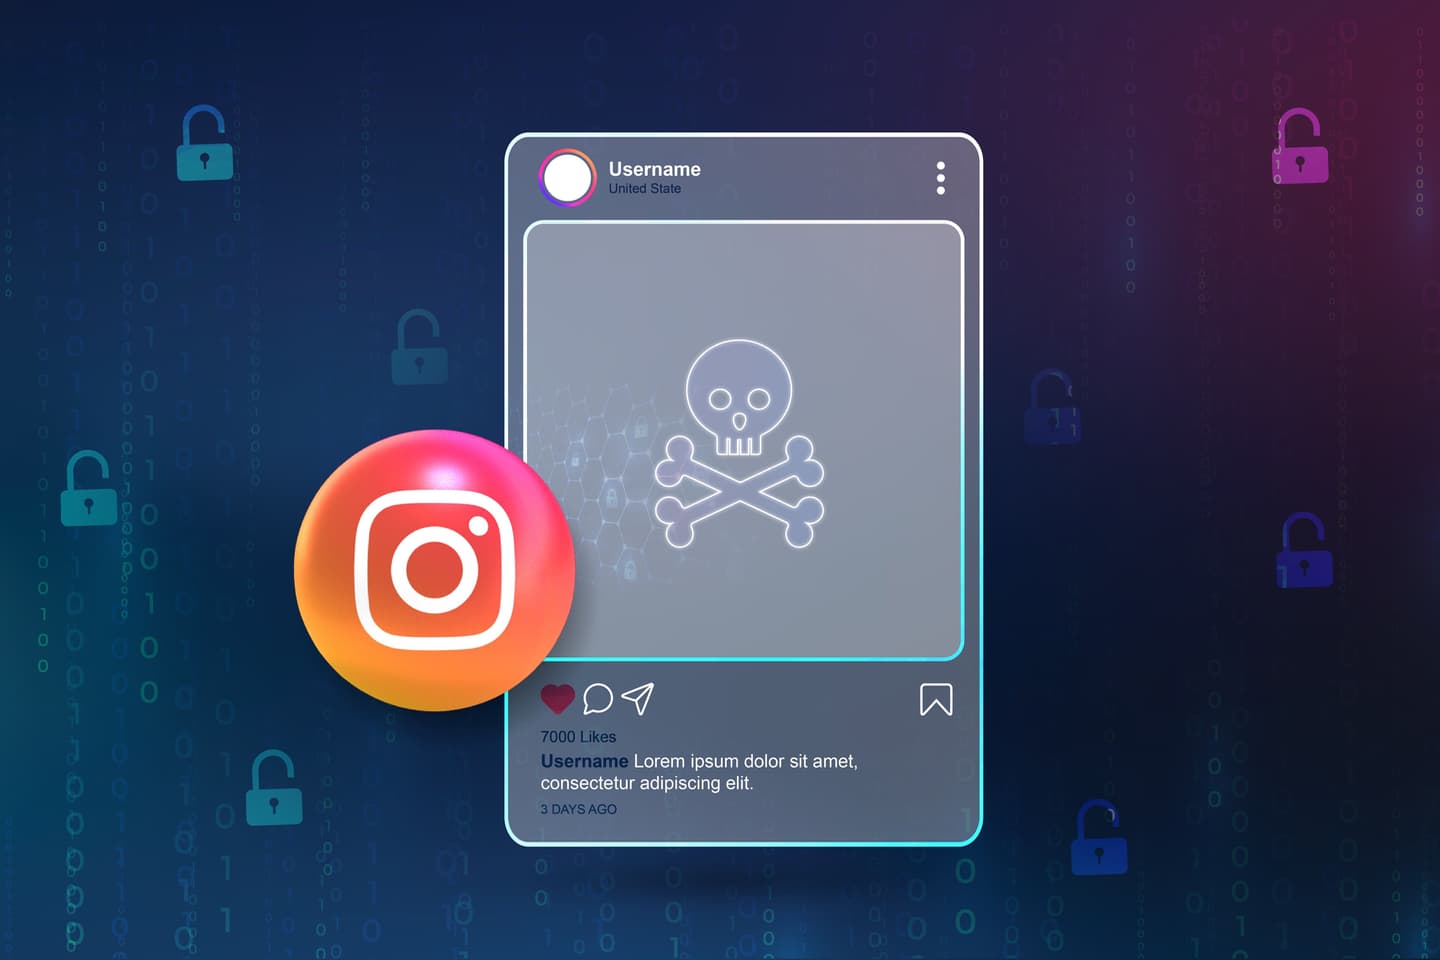 How to Recover a Hacked Instagram